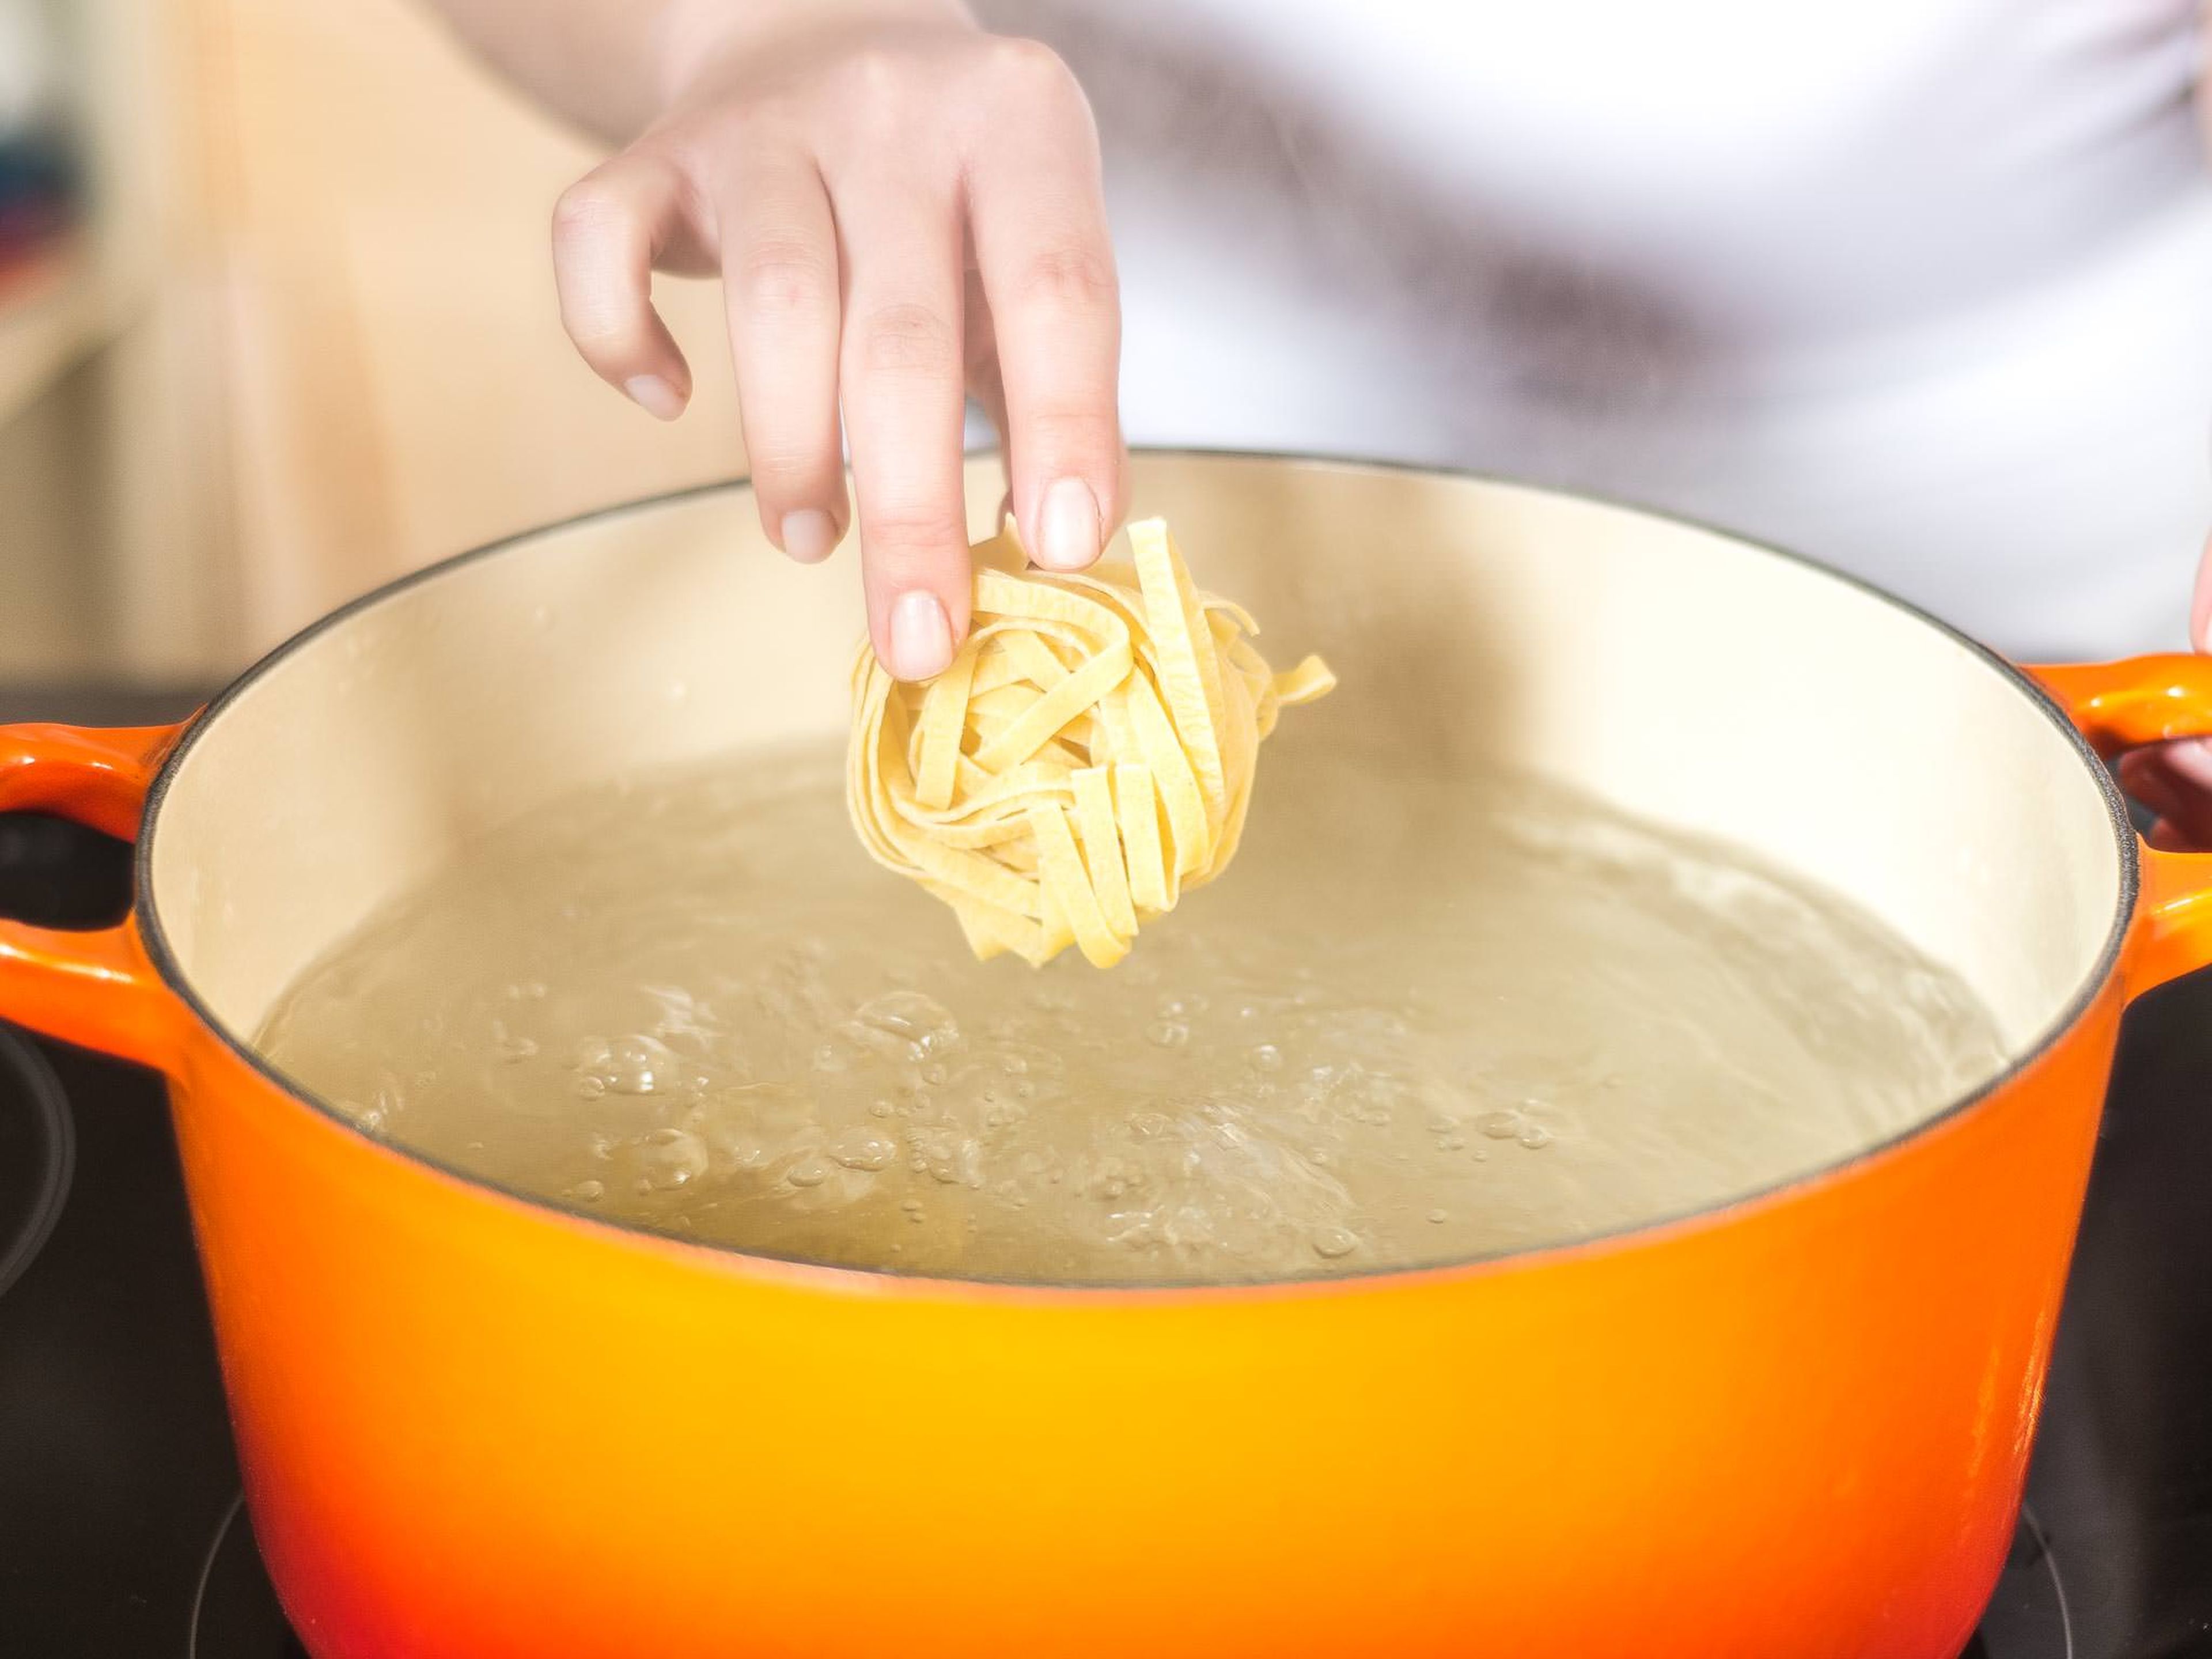 Cook pasta for approx. 8 – 10 min. in plenty of salted boiling water, according to package instructions. When draining, save some pasta water and set aside.